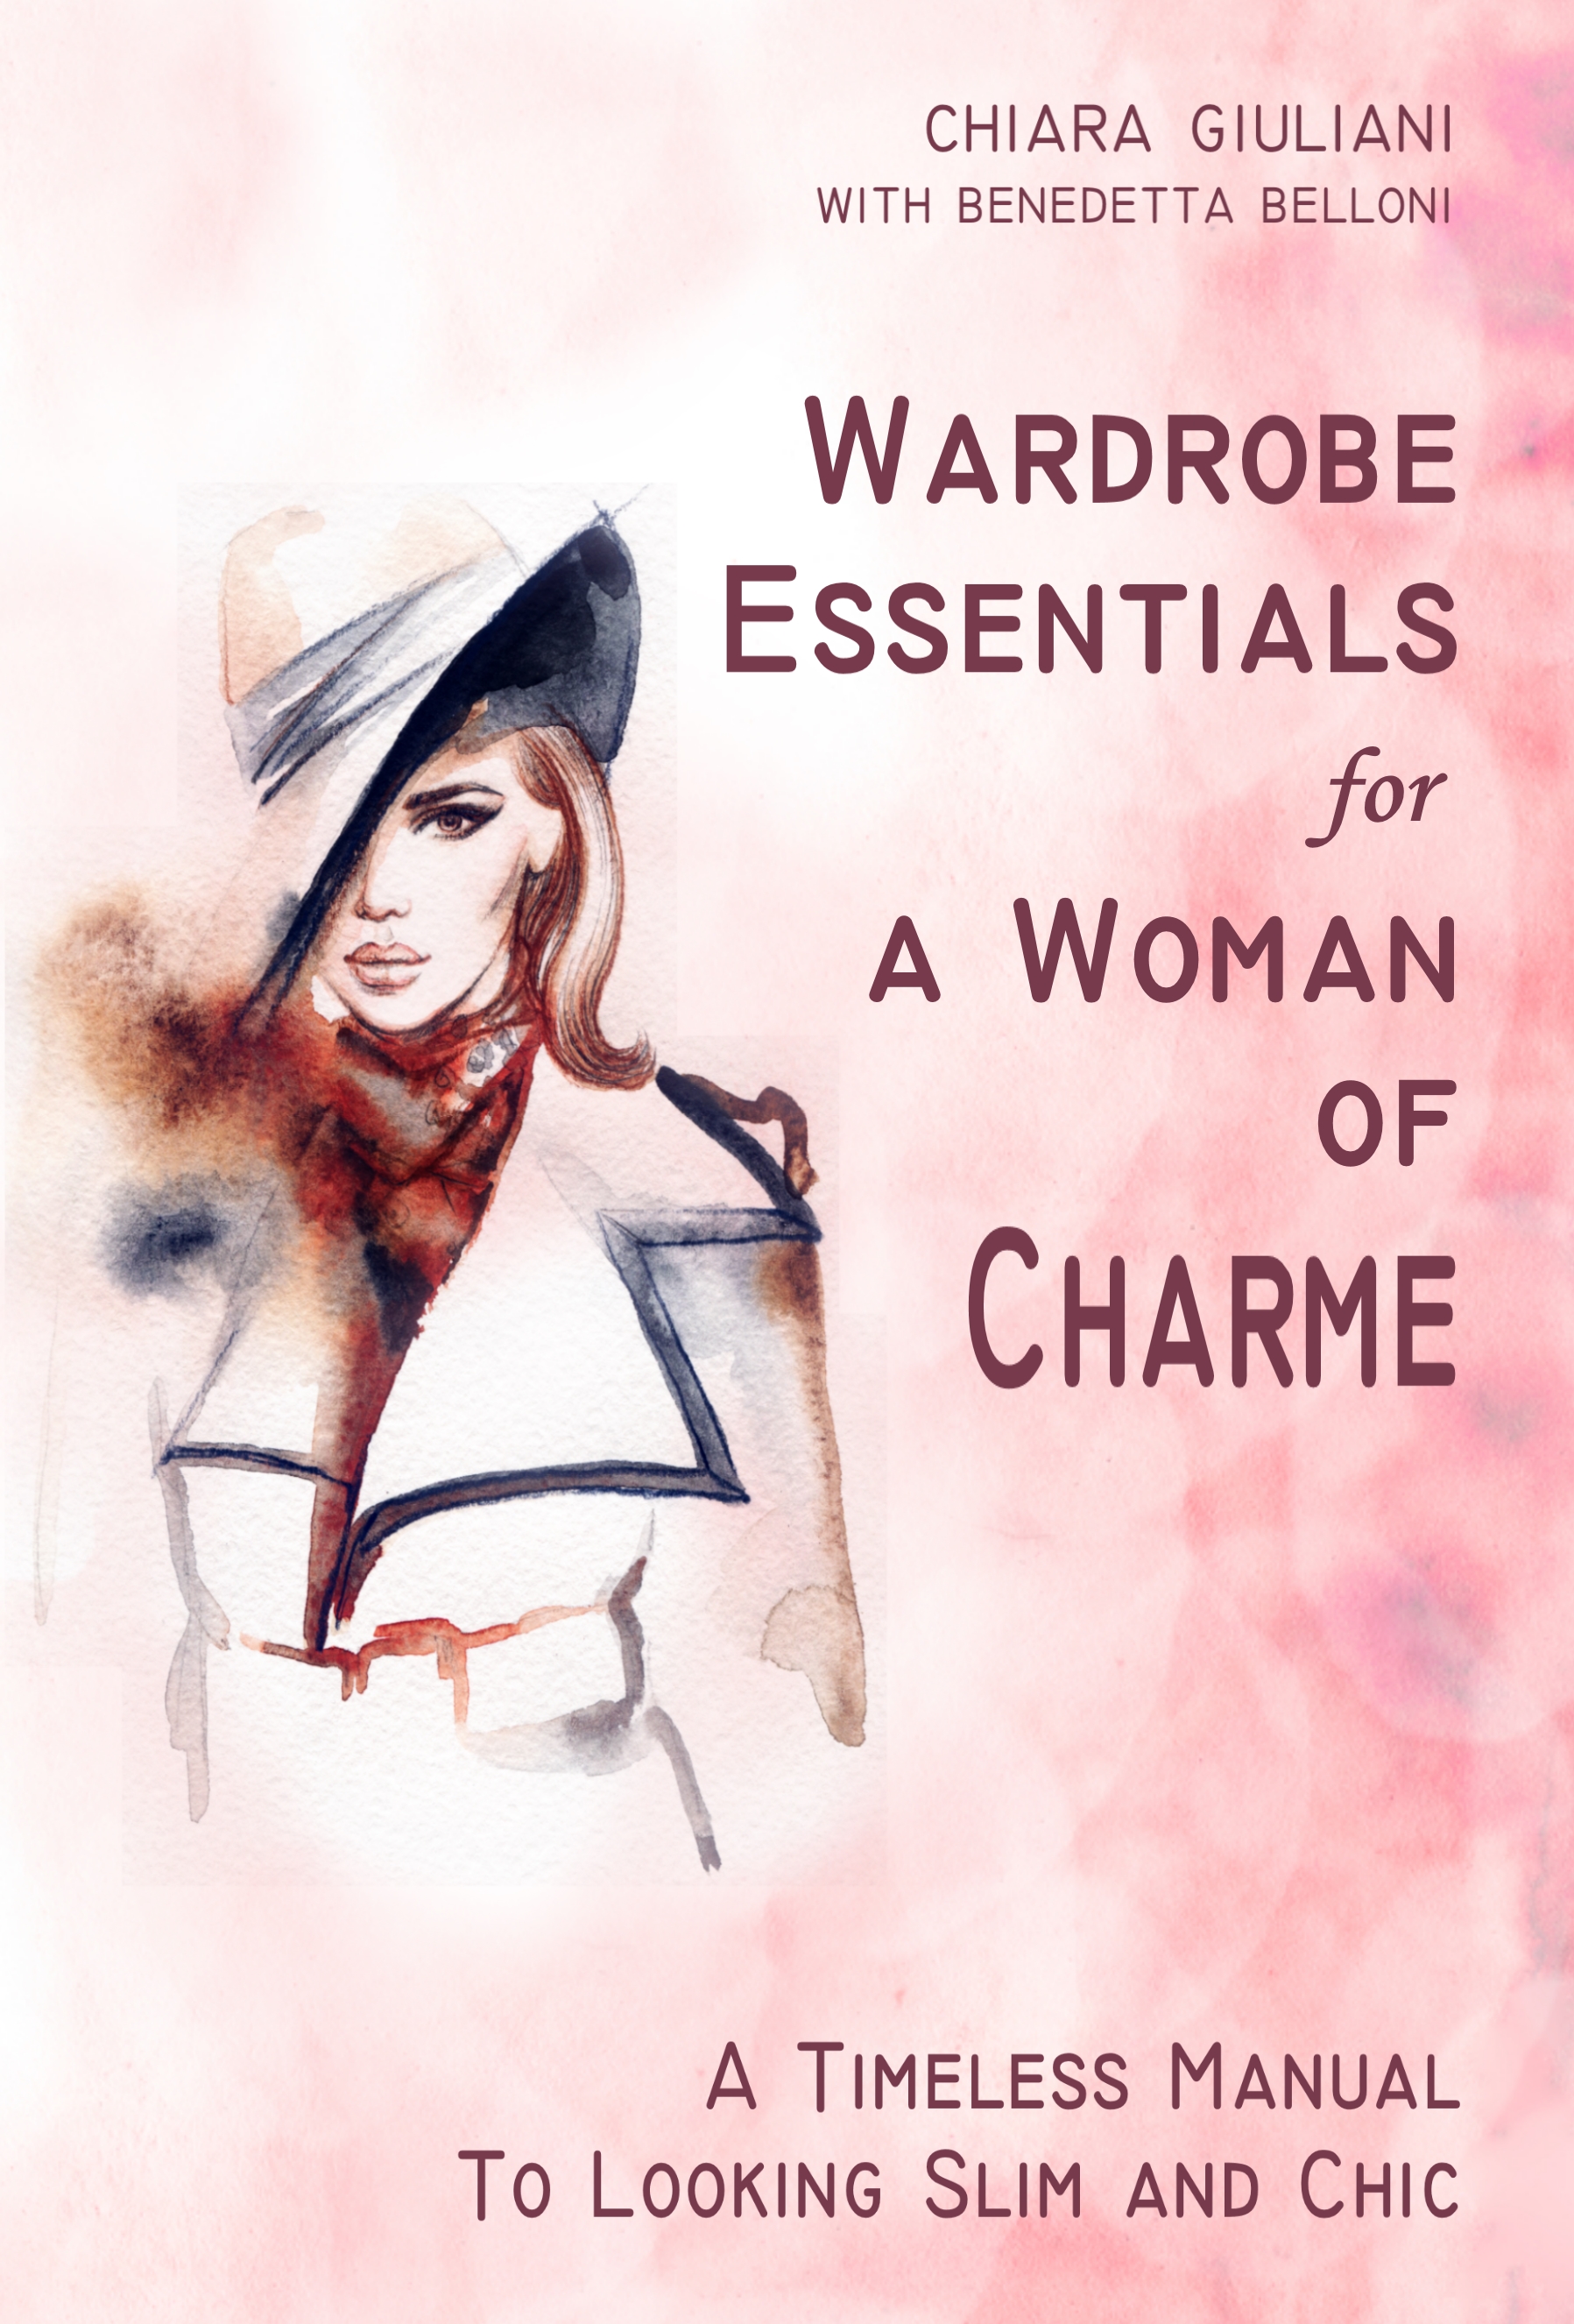 My newest book! Wardrobe Essentials for a Woman of Charme